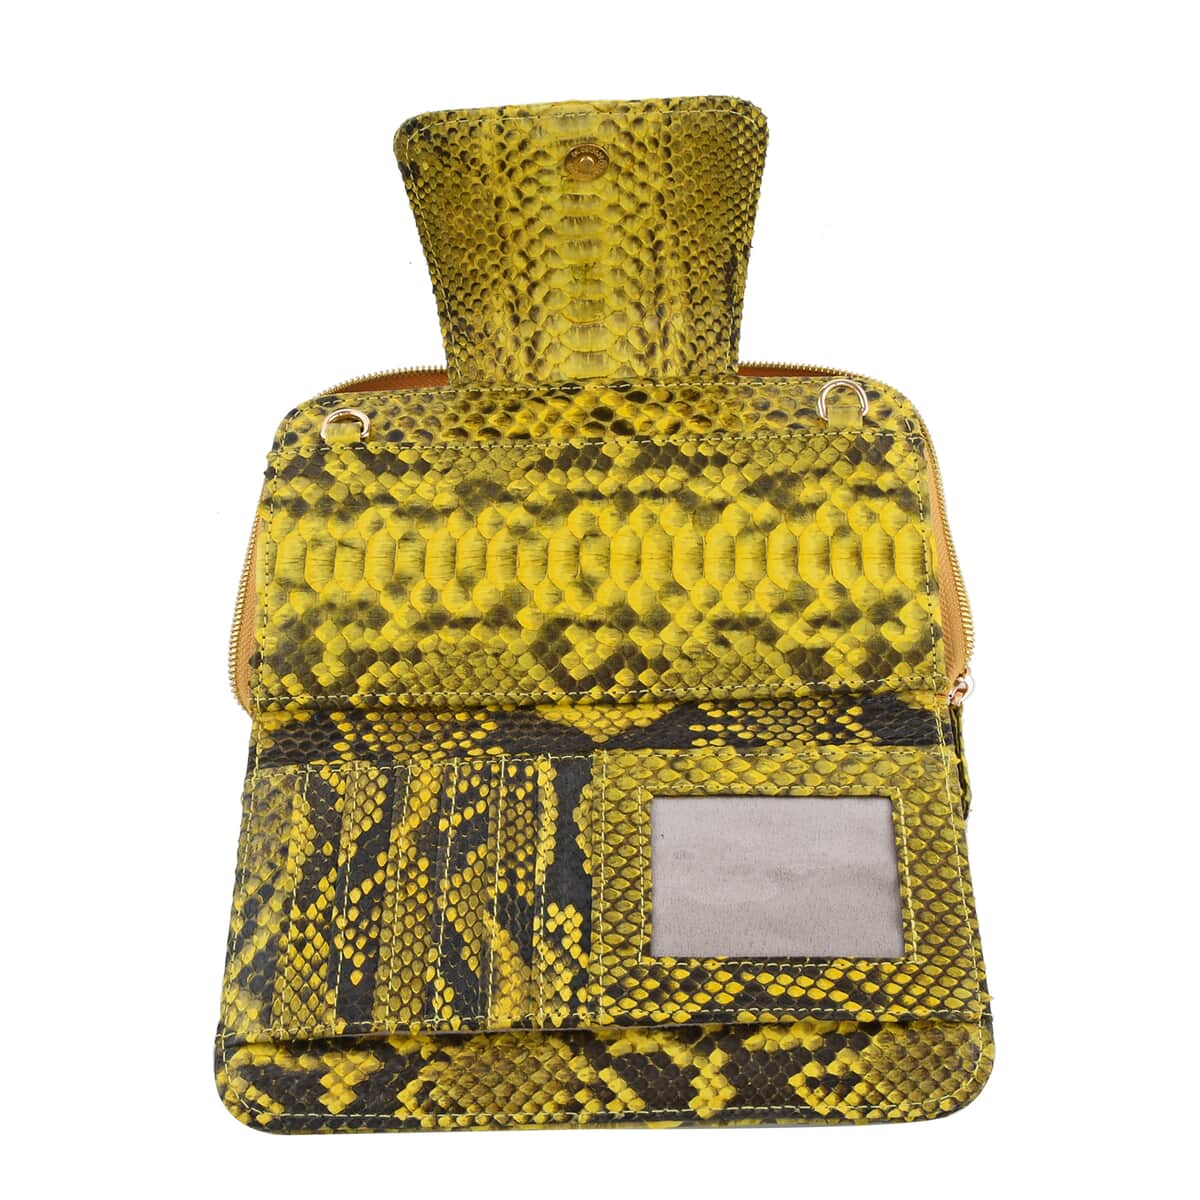 The Pelle Collection Handmade 100% Genuine Python Leather Golden & Yellow Color Crossbody Wallet image number 4